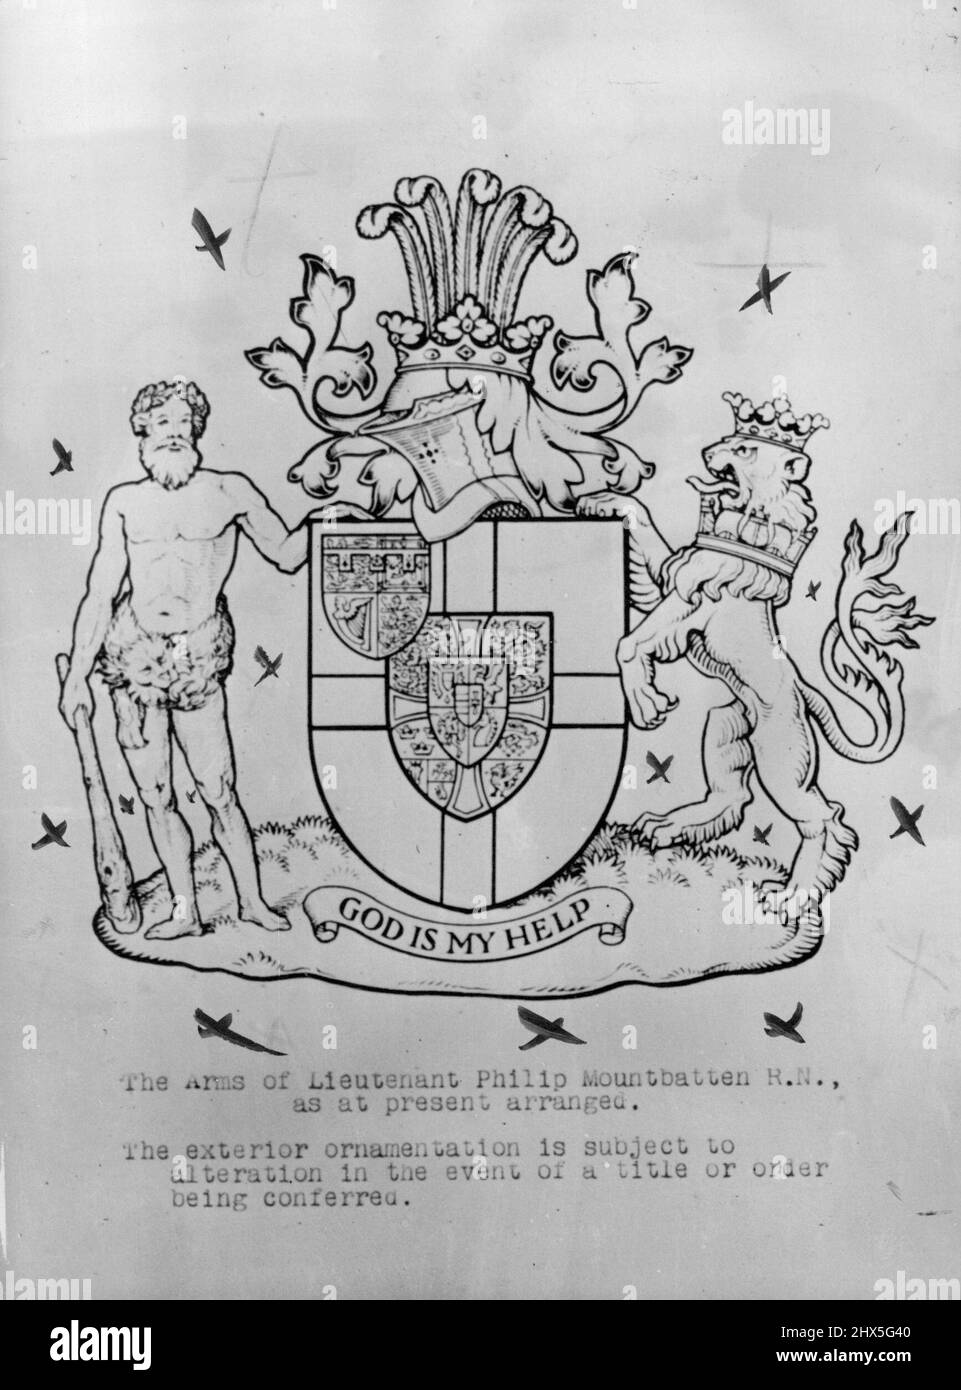 The arms of Lieutenant Philip Mountbatten R.N., as at present arranged. The exterior ornamentation is subject to alteration in the event of a title or order being conferred. Lieut Philip Mountbatten's Coat Of Arms - LT. Philip Mountbatten's coat of arms. The design bears the arms of Princess Alice, Lieut. Mountbatten's grandmother over all in the first quarter, on the arms of Denmark and Greece, and the lion of England gorged with a naval crown. The crest has five ostrich features derived from the Carisbrooke and Mountbatten arms. November 24, 1947. Stock Photo